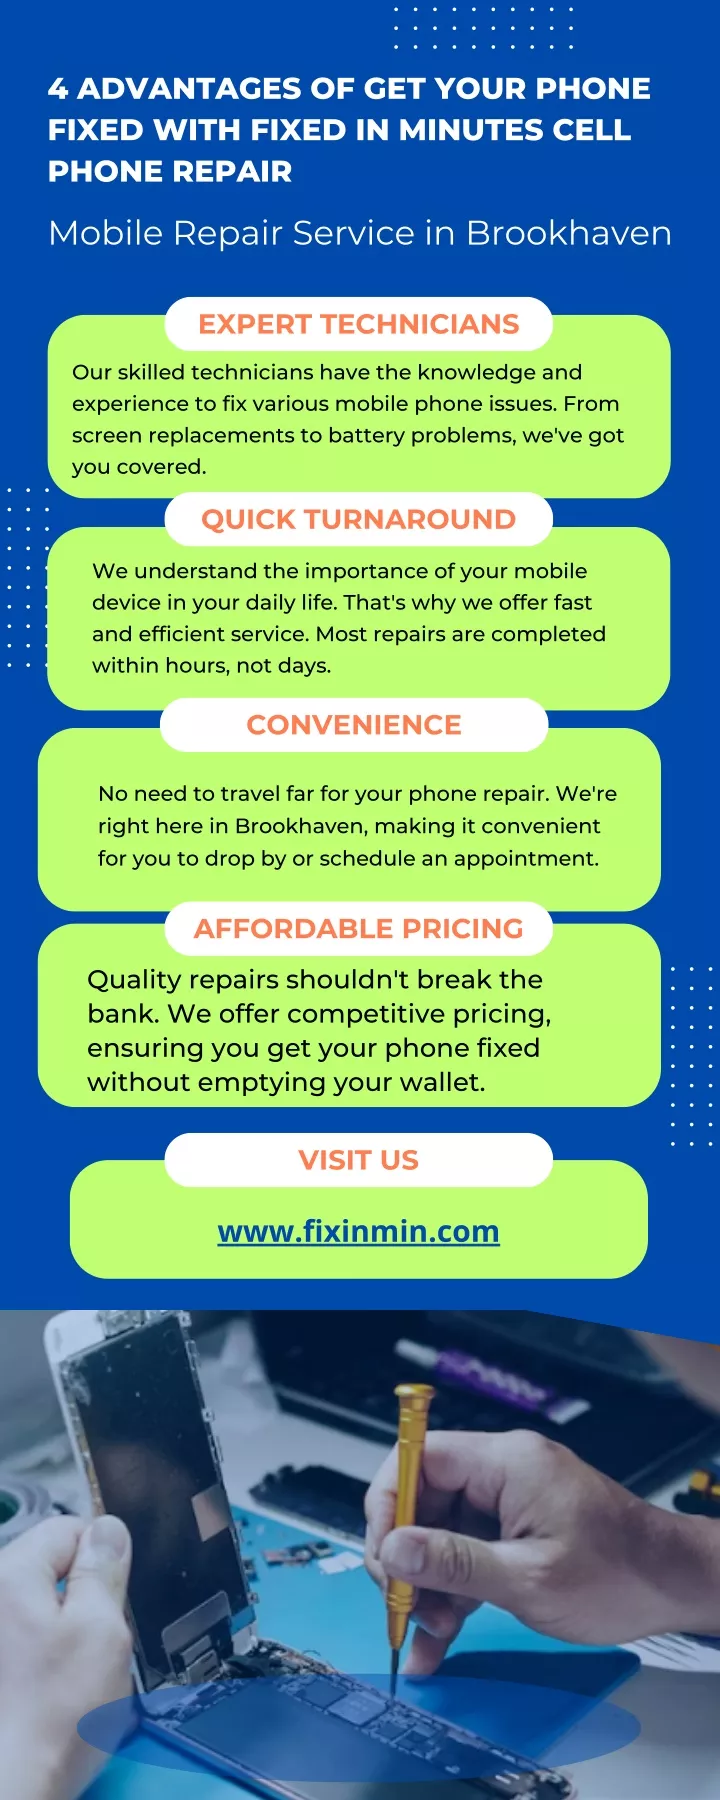 4 advantages of get your phone fixed with fixed